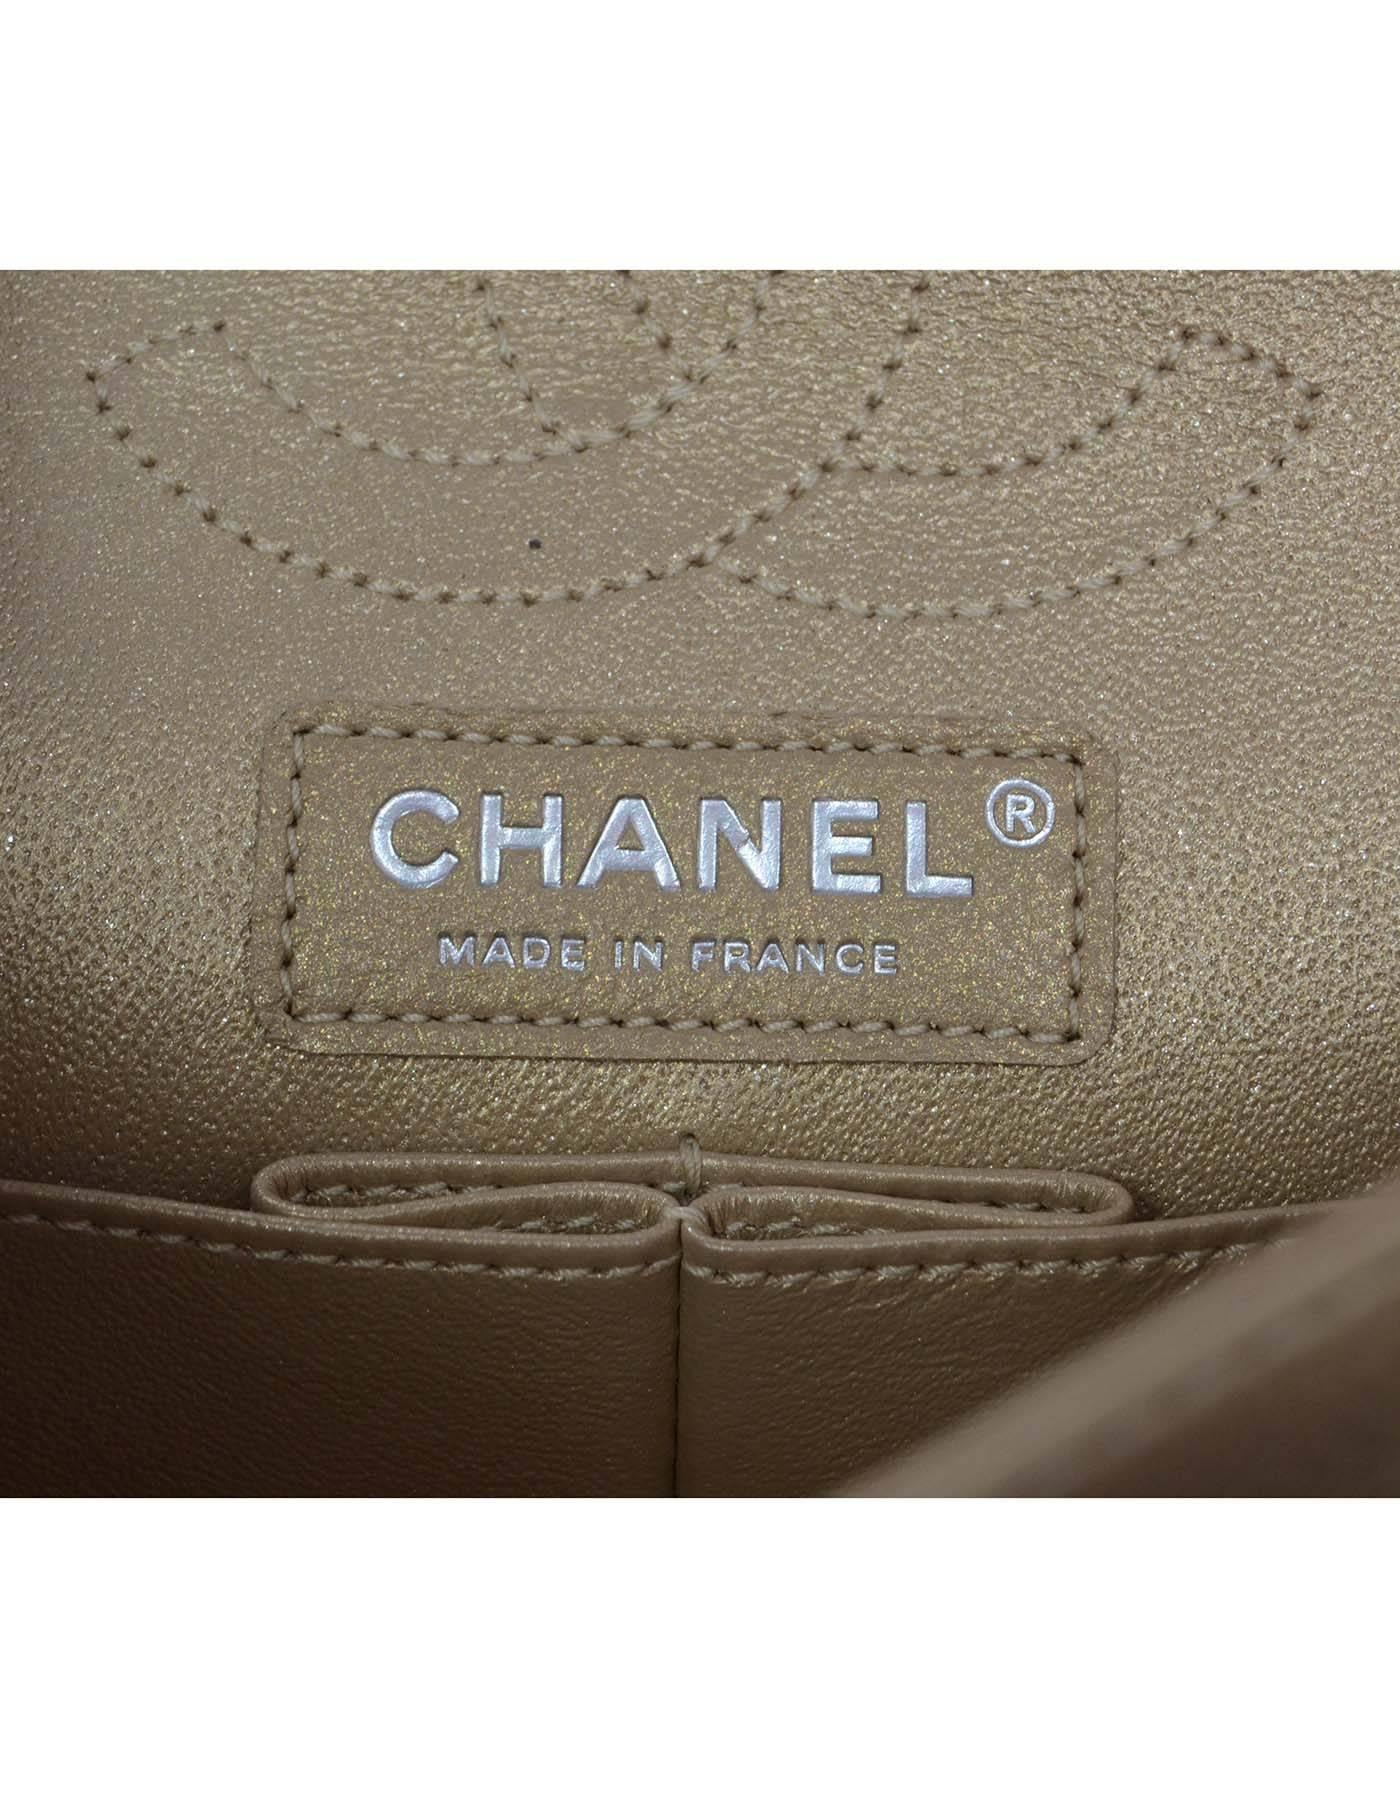 Chanel Rare Collectors Gold Distressed Lucky Charms ReIssue Bag 2.55 rt. $8, 775 2